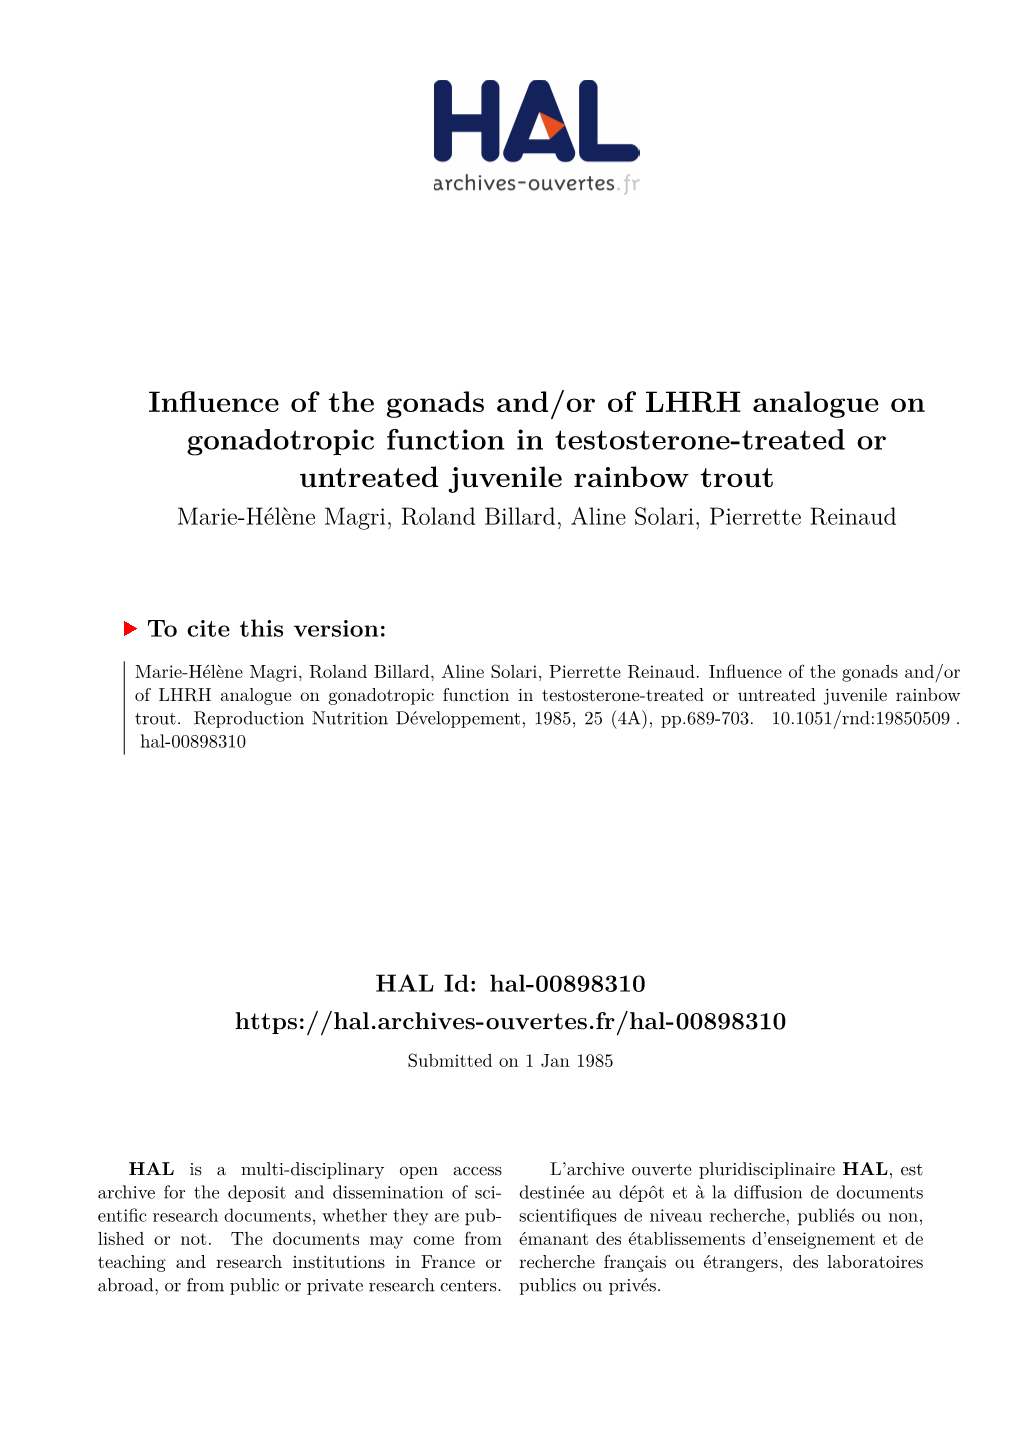 Influence of the Gonads And/Or of LHRH Analogue on Gonadotropic